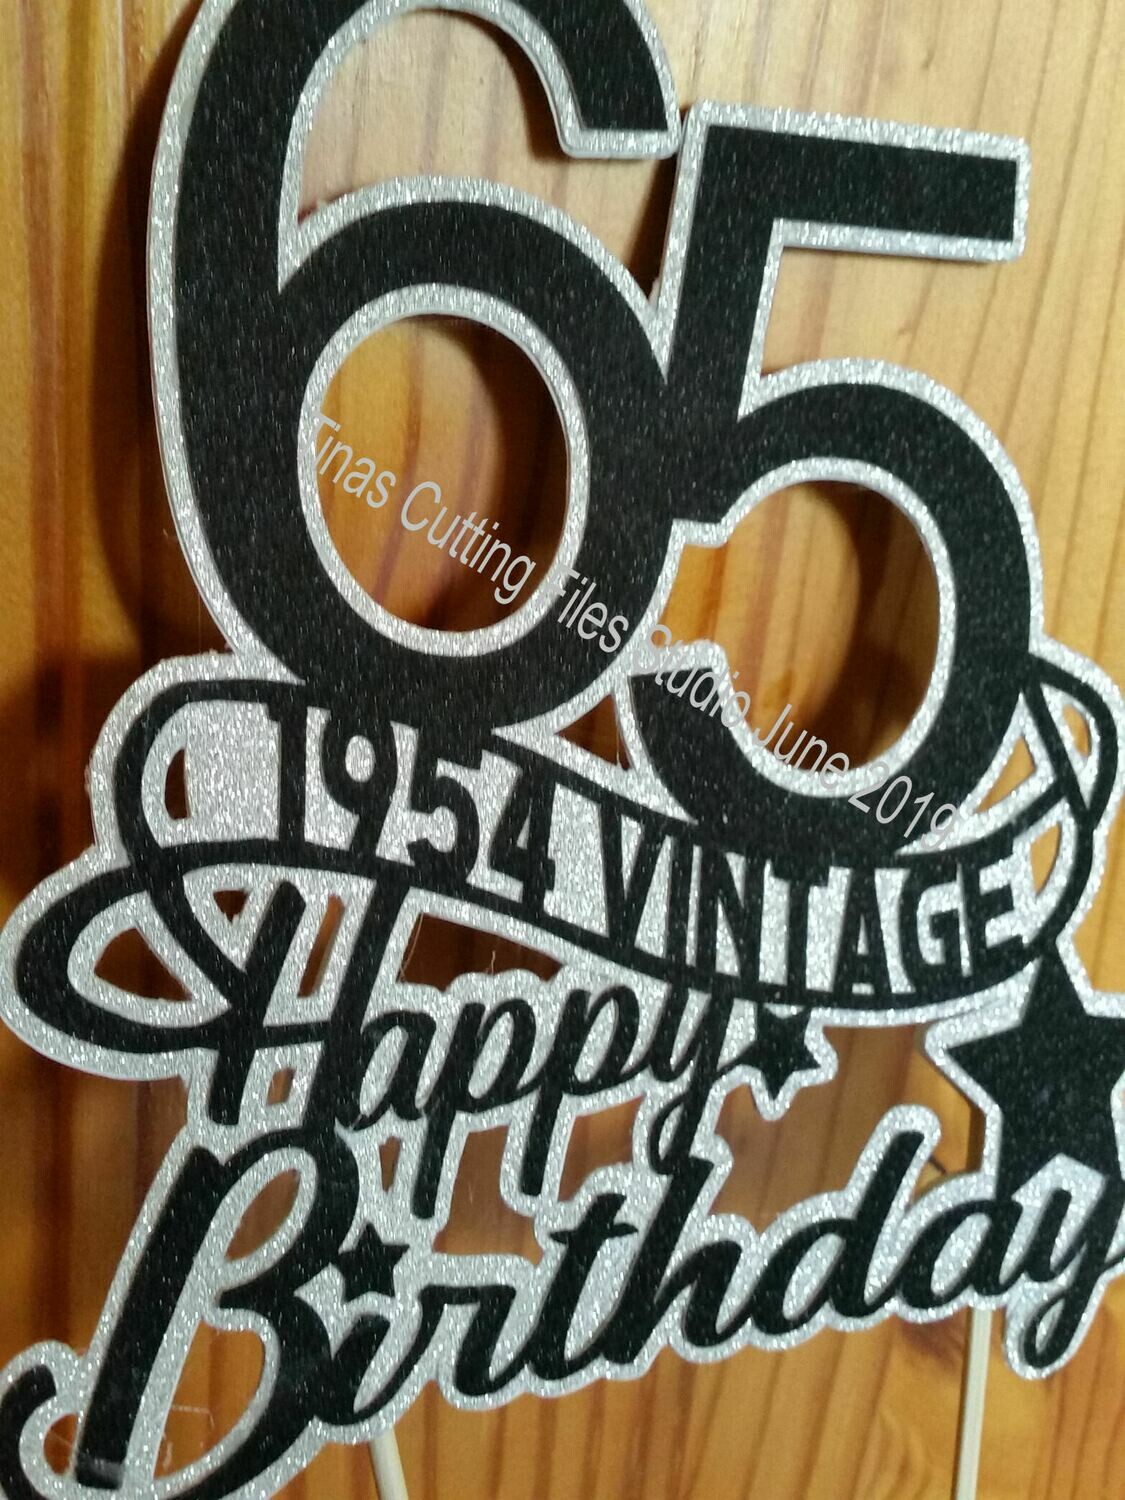 65th 1954 Vintage Birthday Cake / Card topper layered